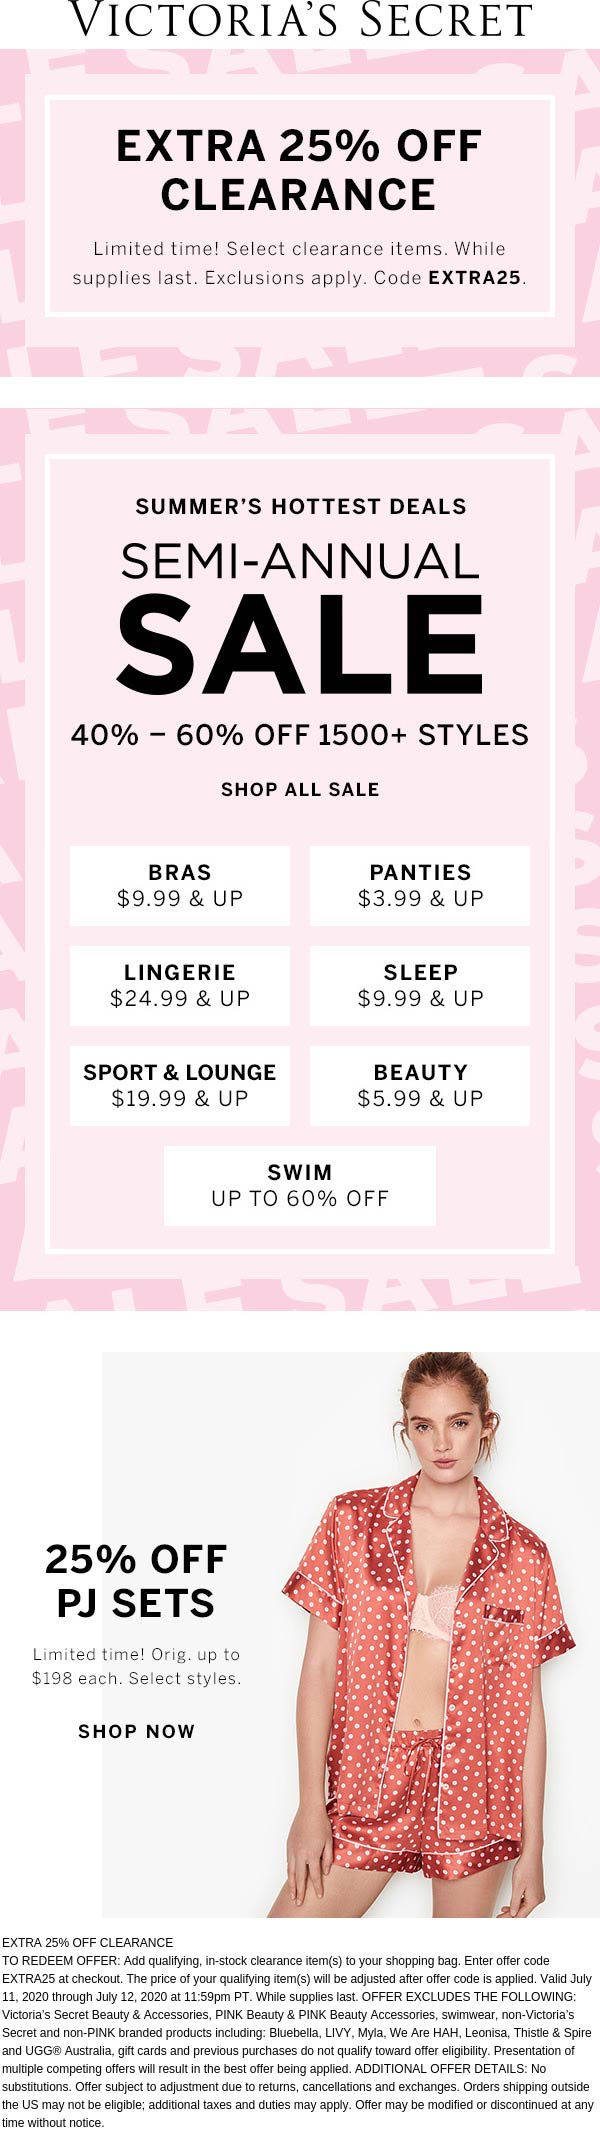 Extra 25 off clearance at Victorias Secret via promo code EXTRA25 